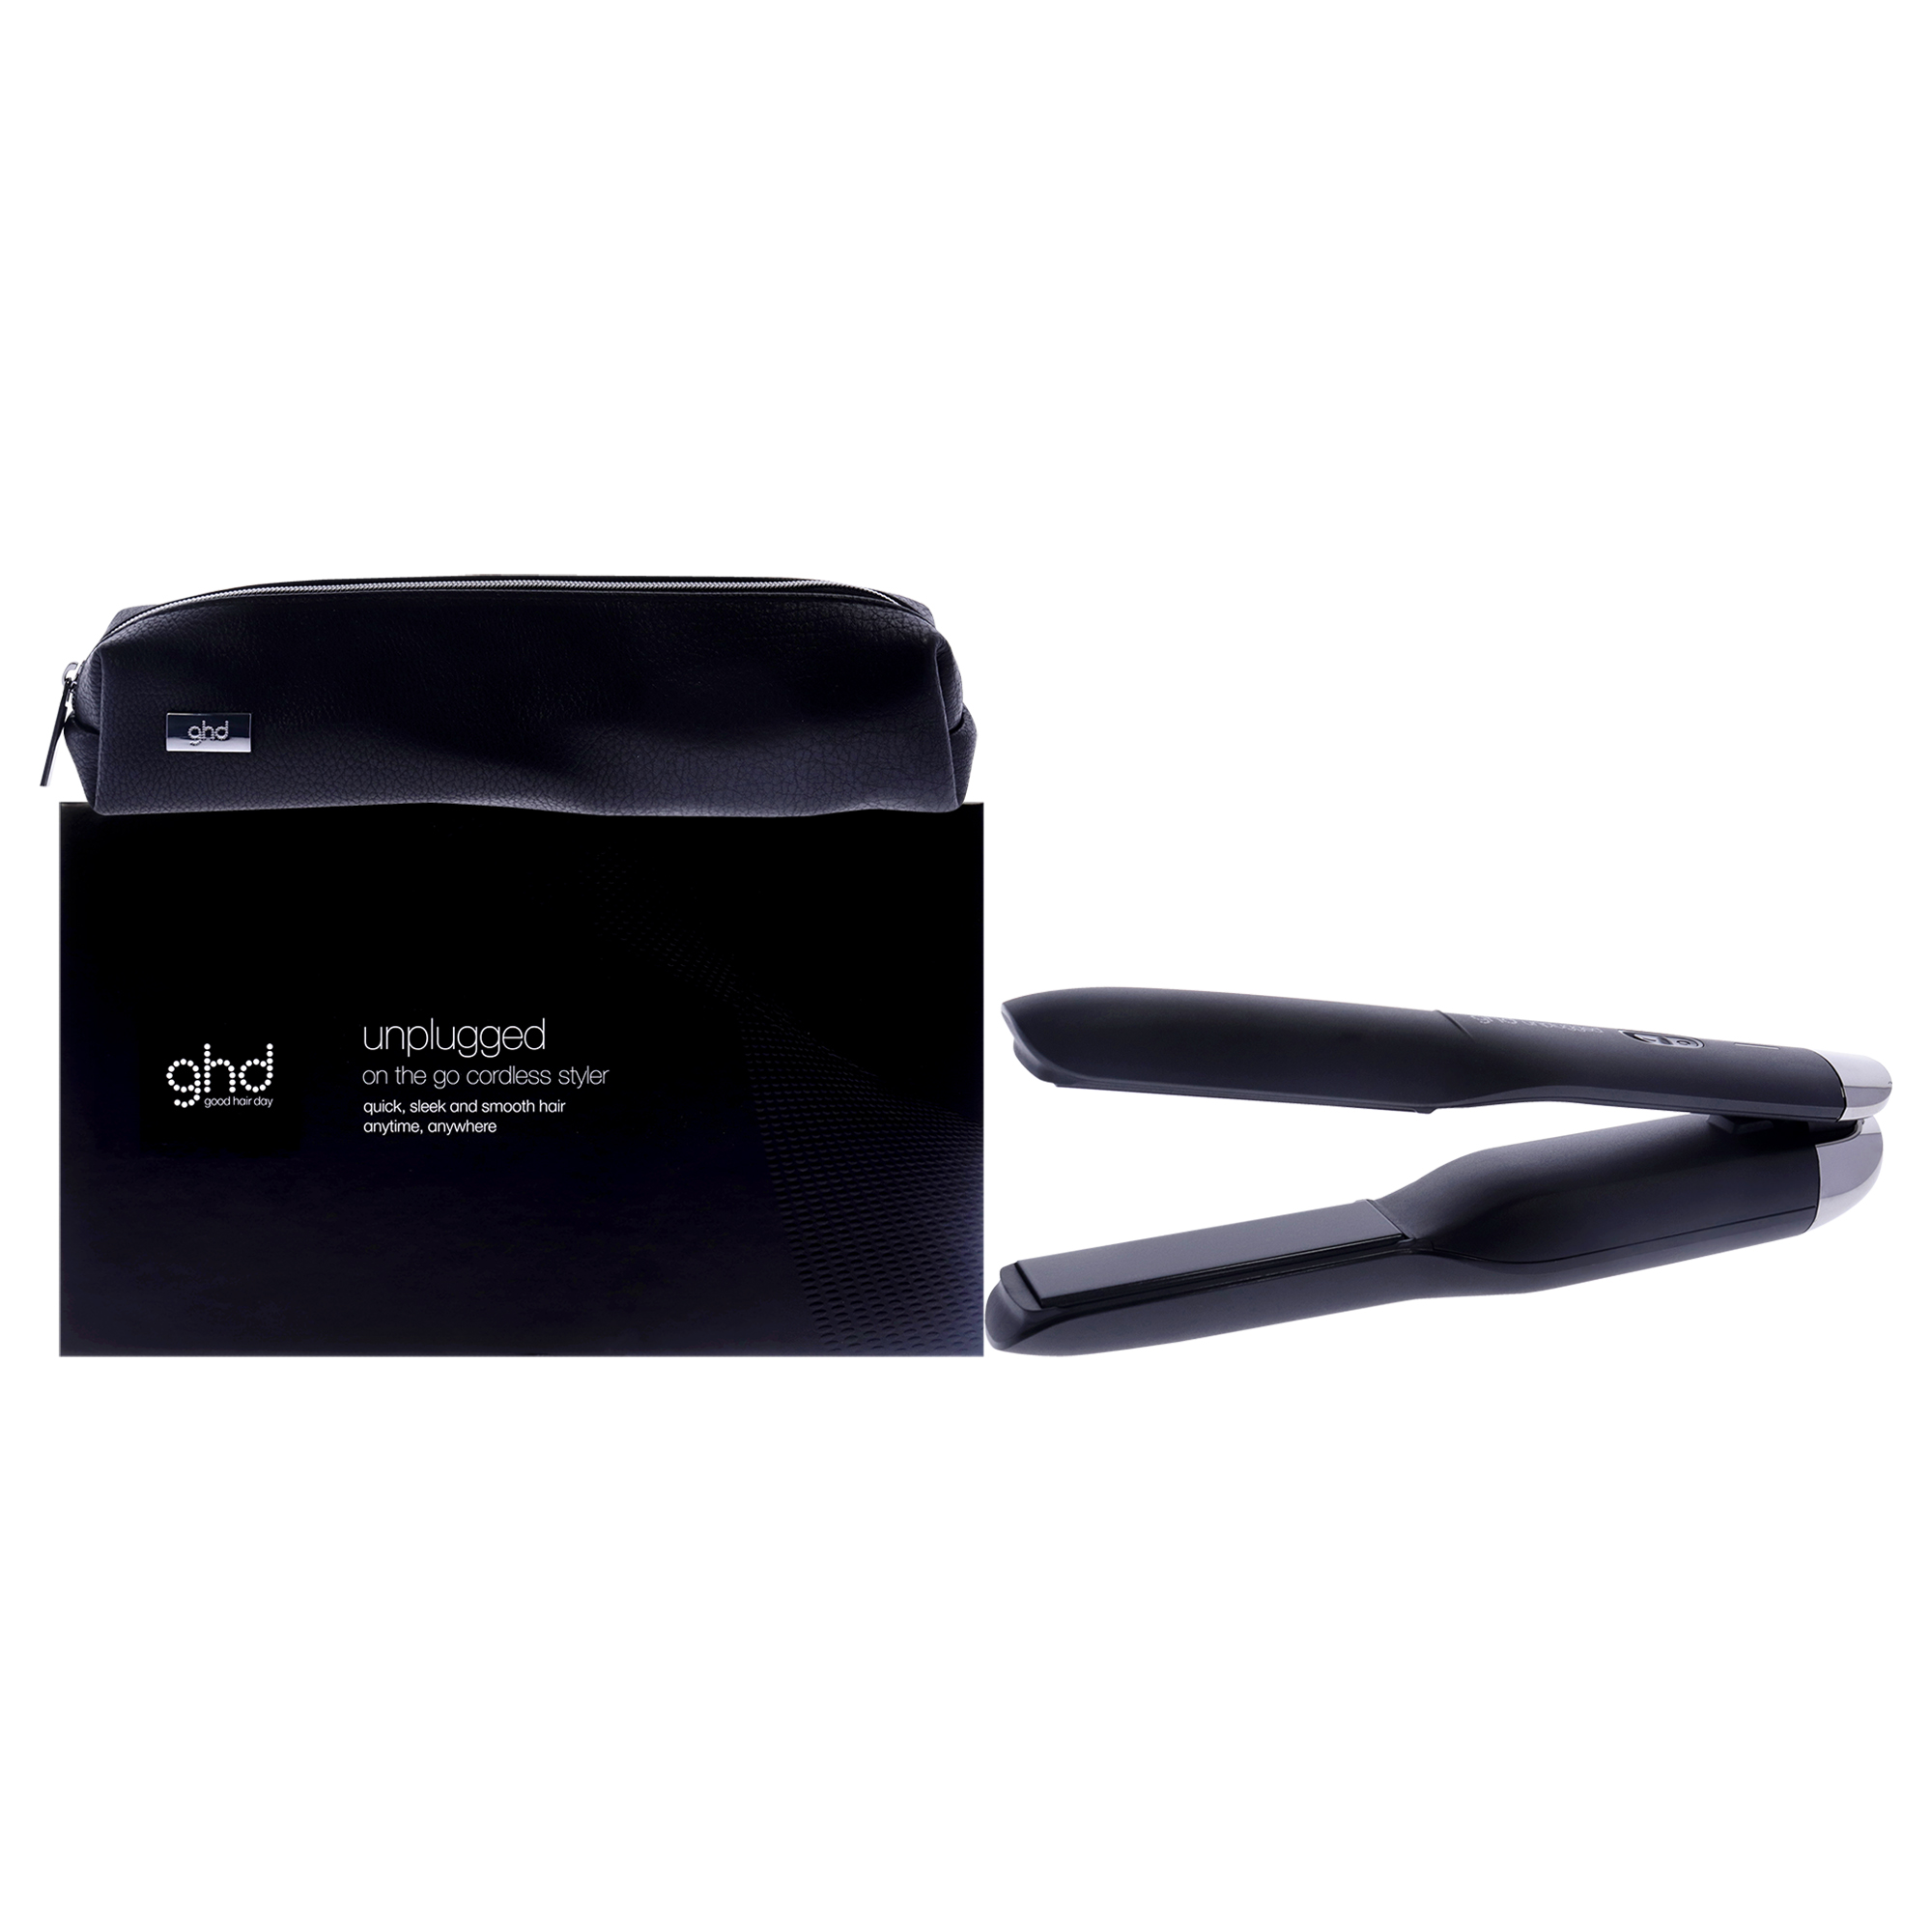 GHD GHD Unplugged Cordless Styler - Black , 1 Inch Flat Iron - image 1 of 5